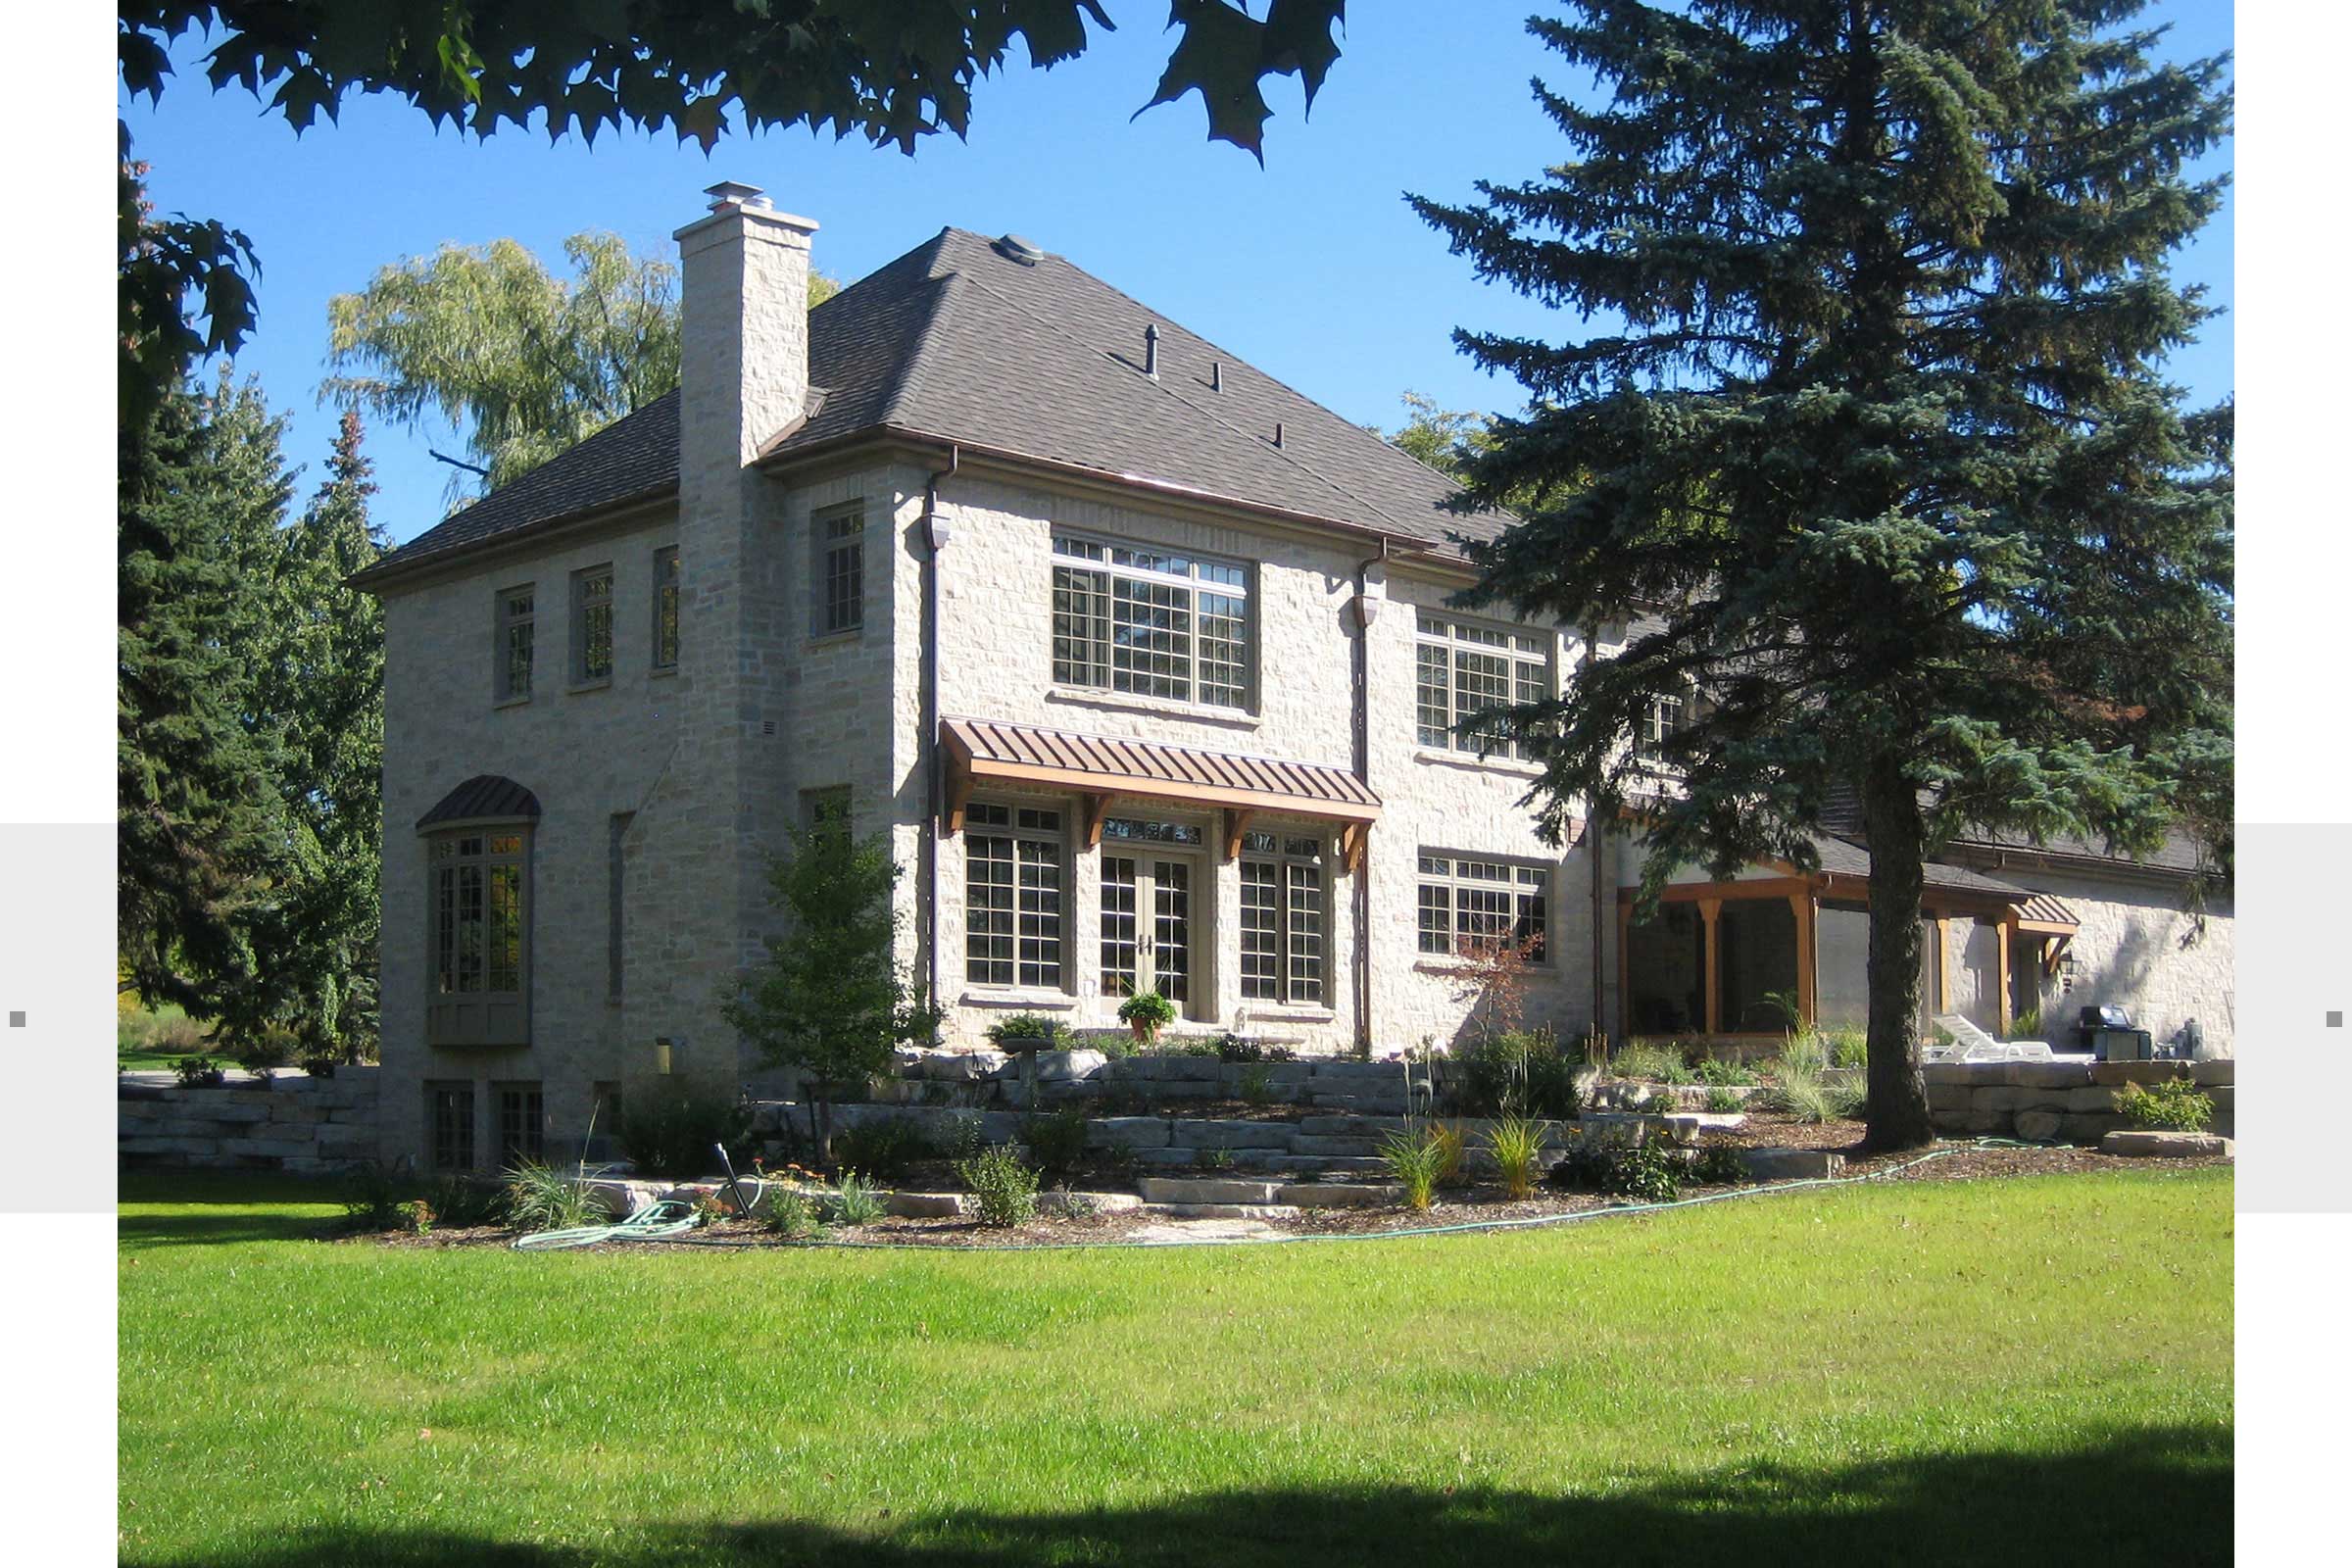 exterior view of stone home